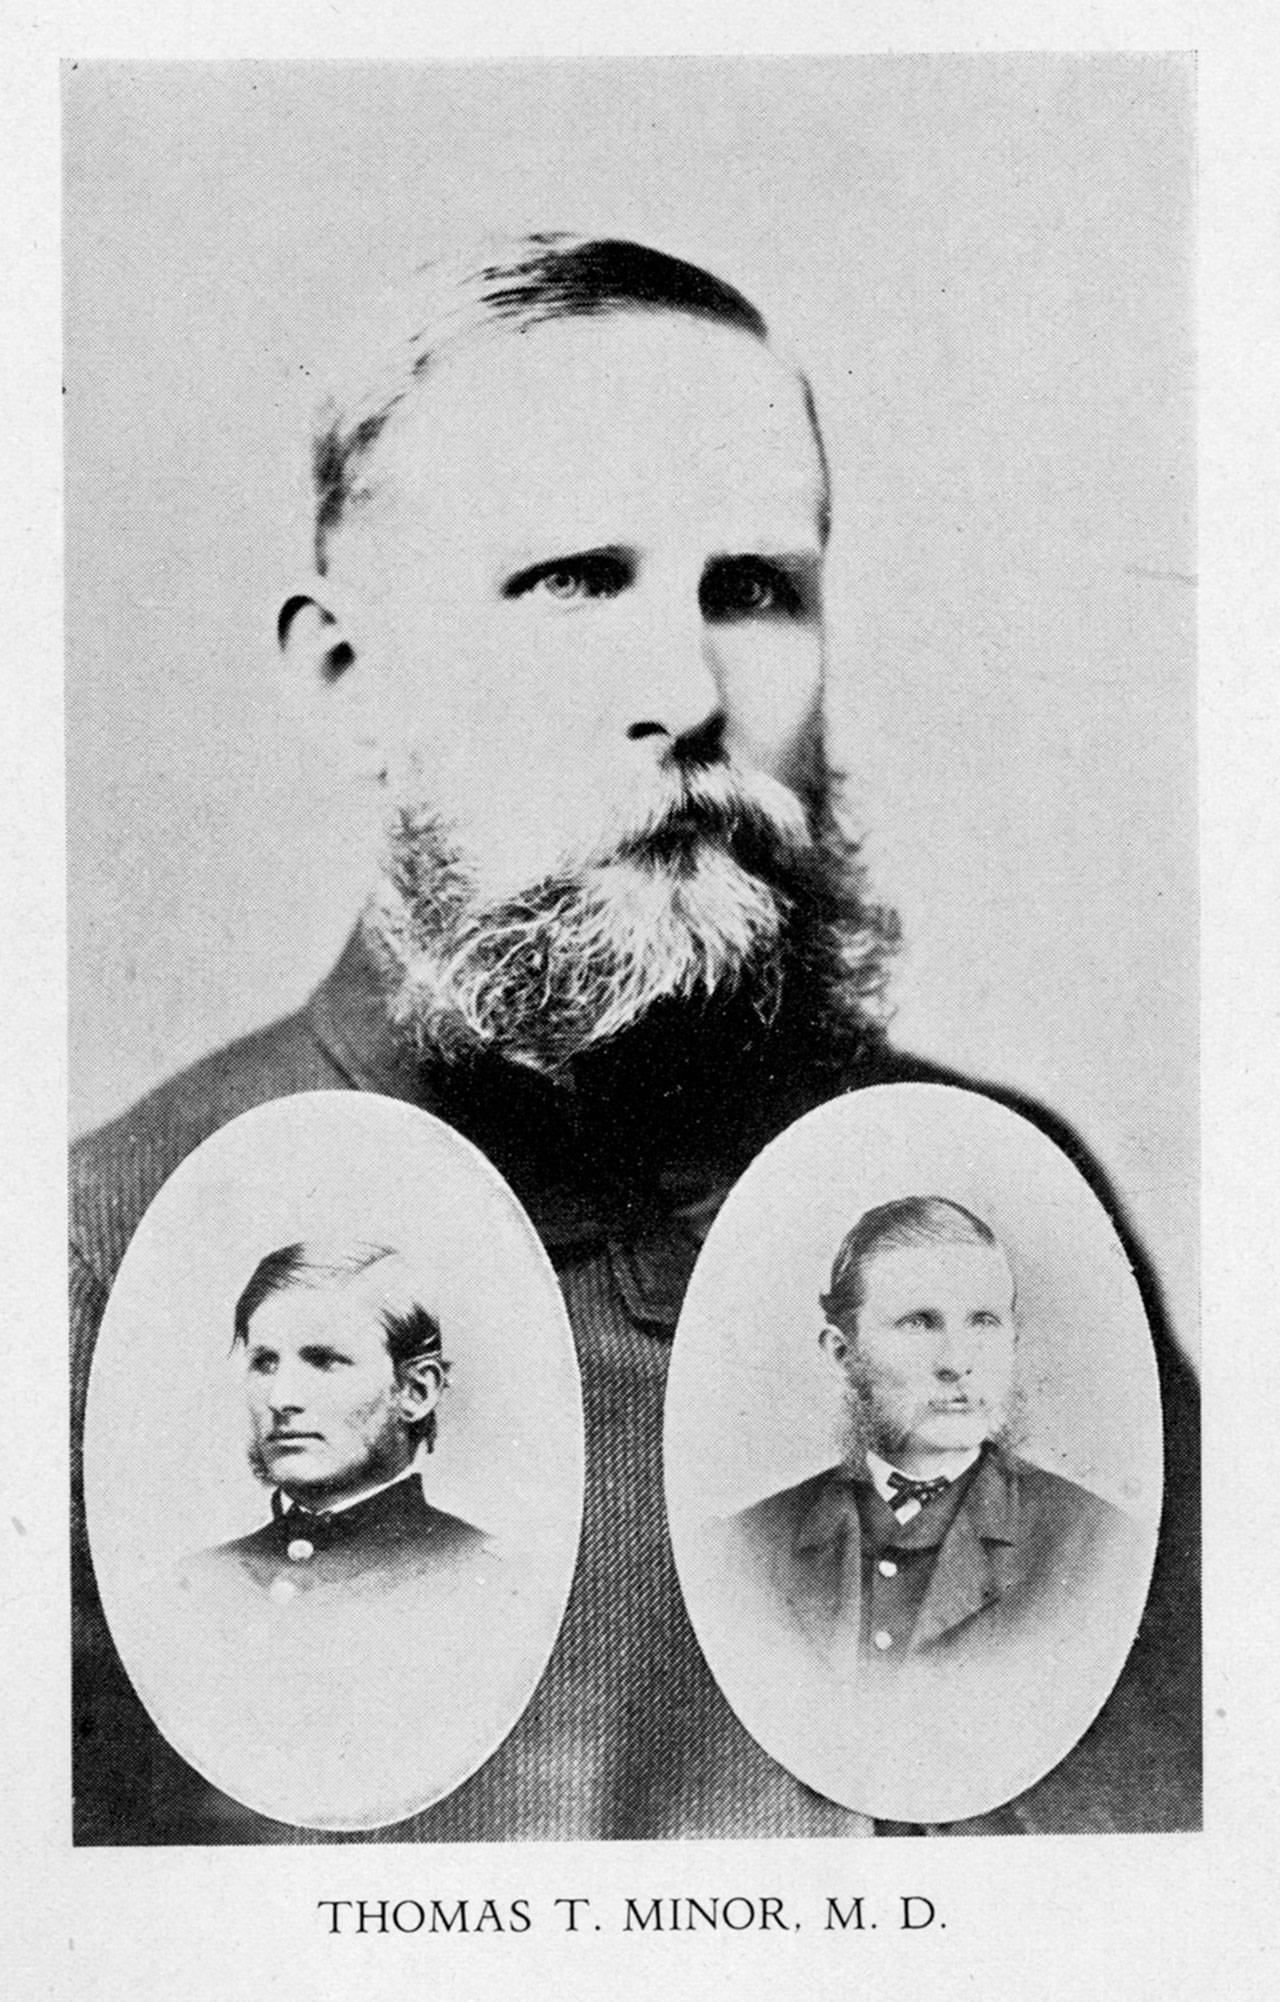 A collage of portraits of Thomas T. Minor from 1864 to 1880. (Jefferson County Historical Society)